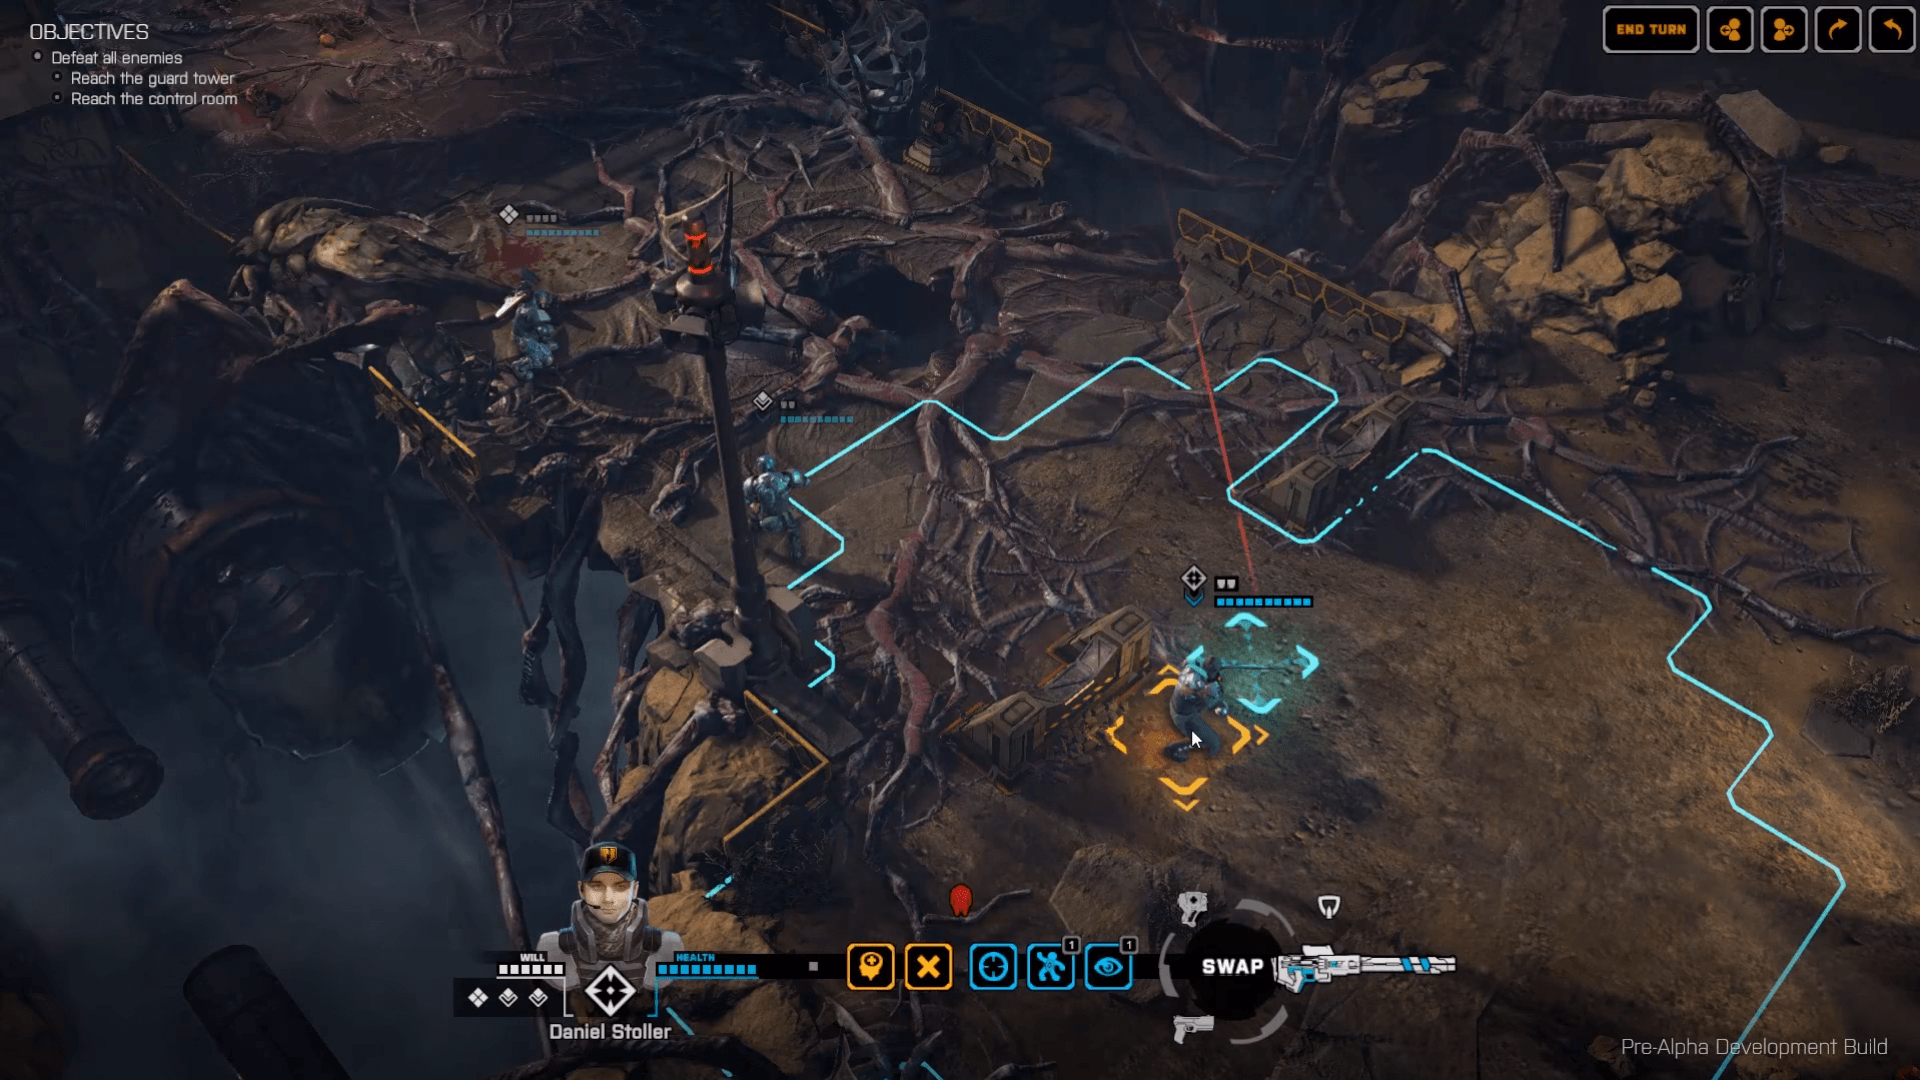 Playing Phoenix Point reveals a far more complex game than